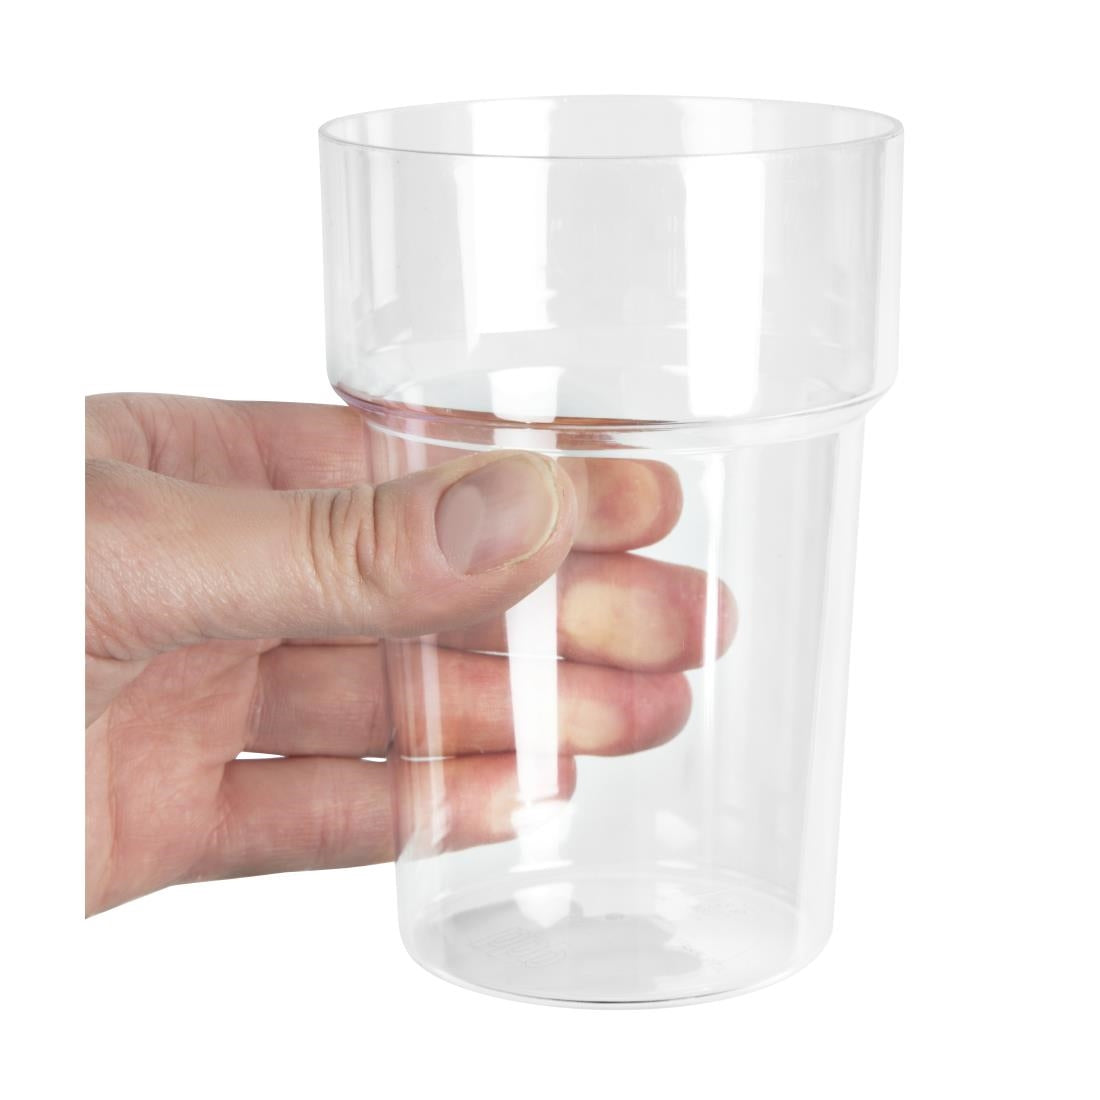 CB782 Polystyrene Tumblers 570ml CE Marked (Pack of 100) JD Catering Equipment Solutions Ltd